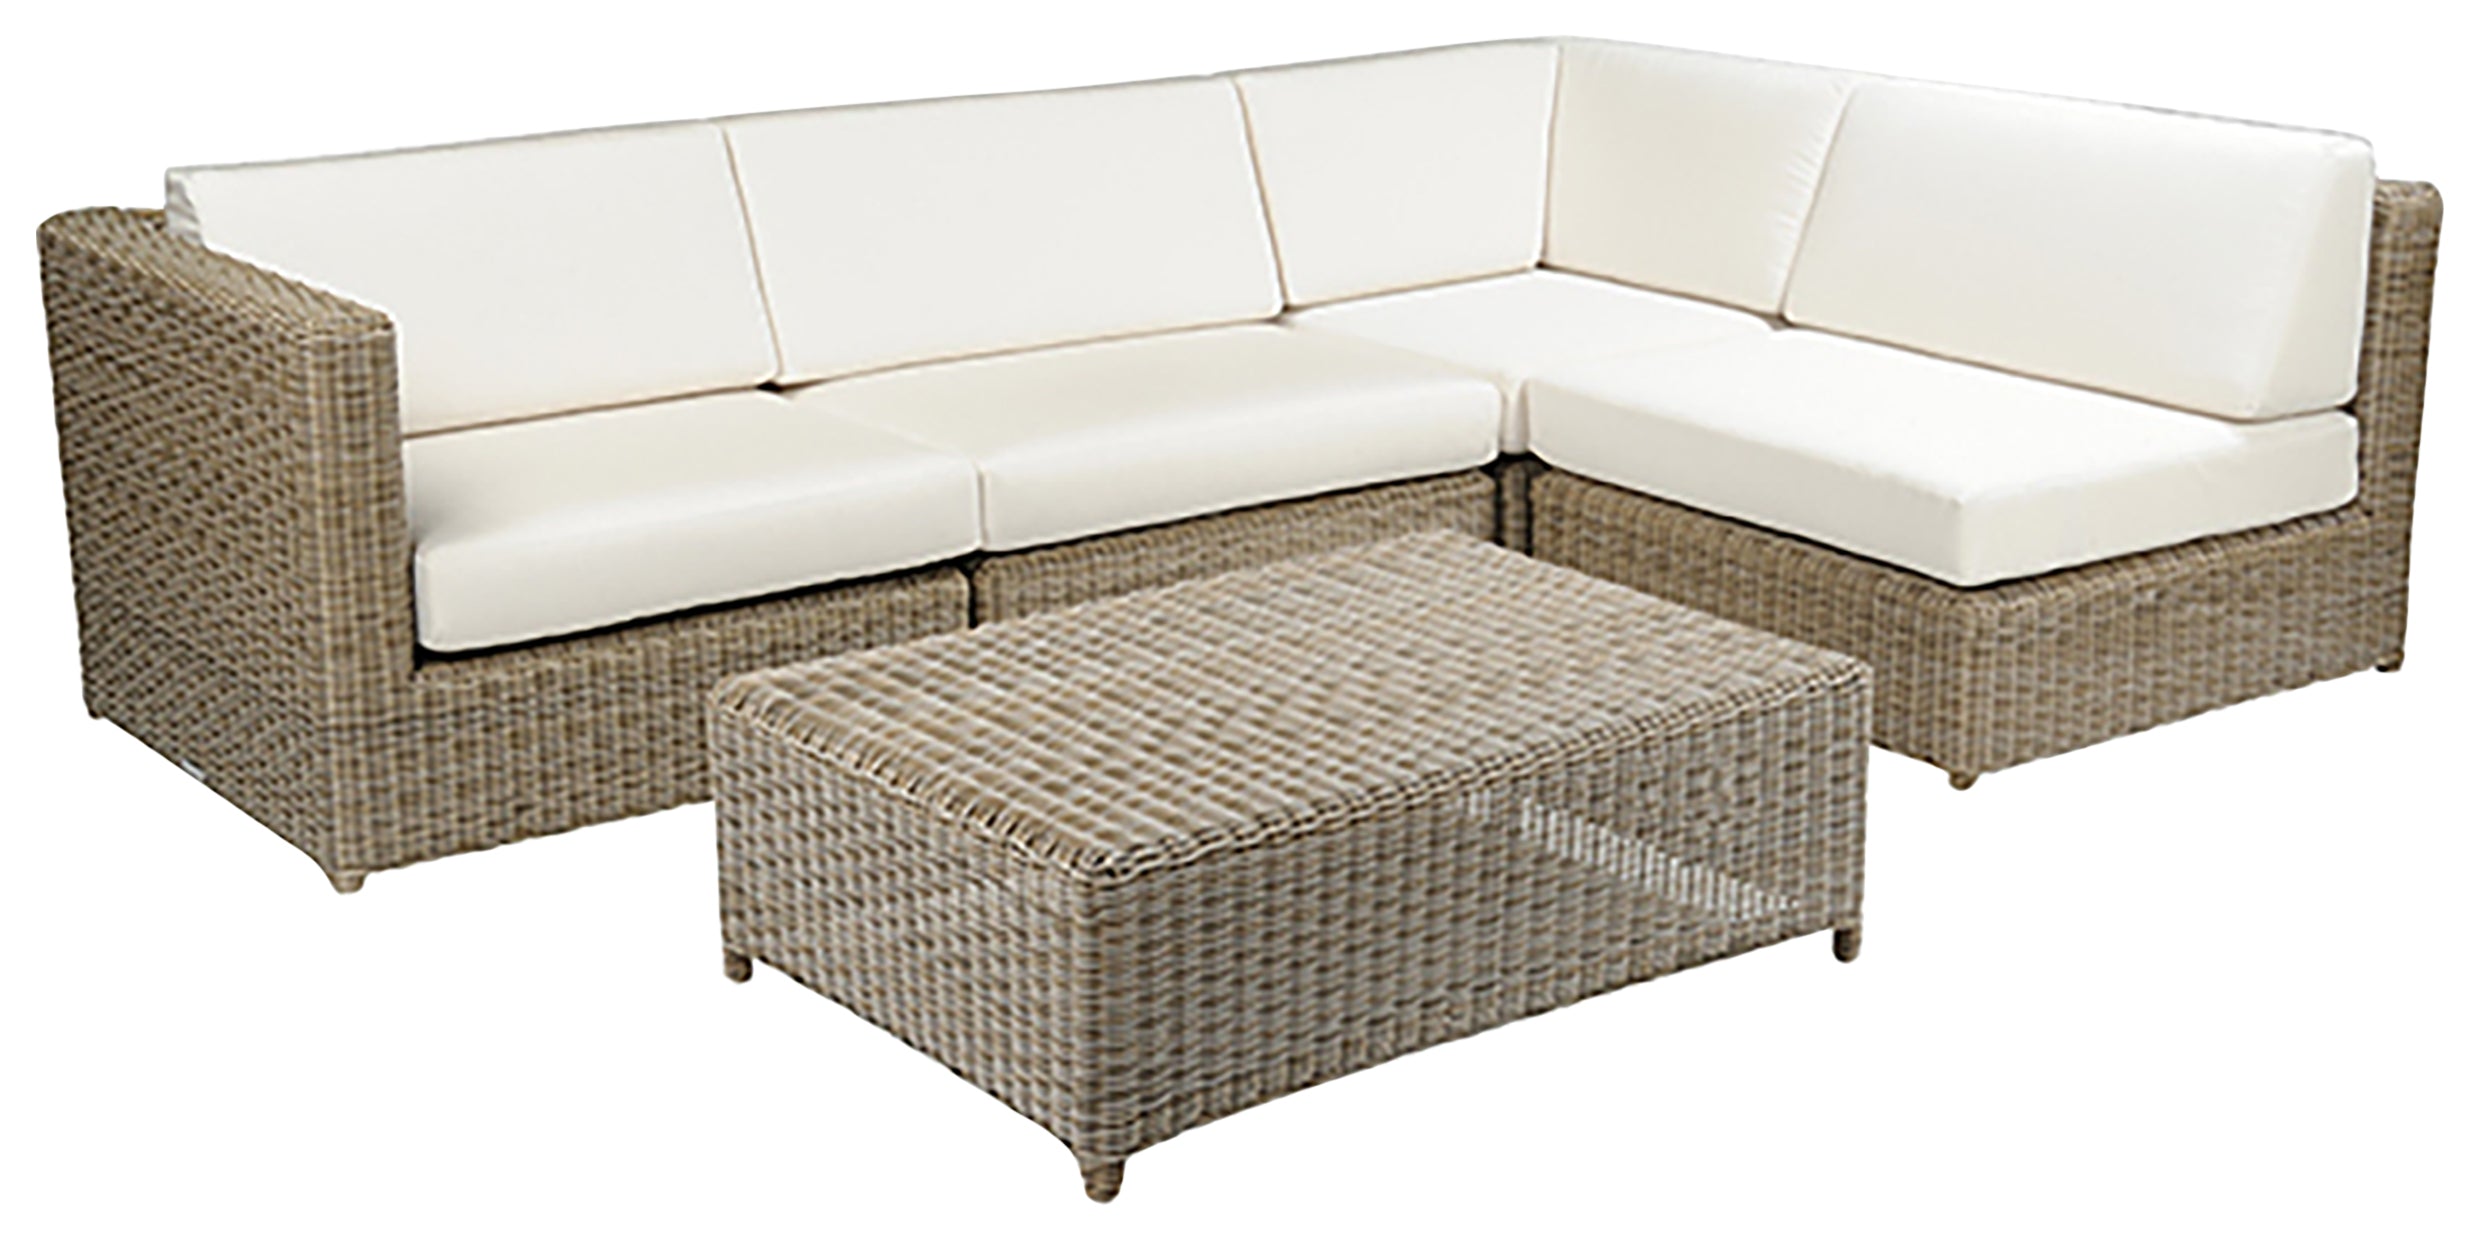 Sectional | Kingsley Bate Sag Harbor Collection | Valley Ridge Furniture